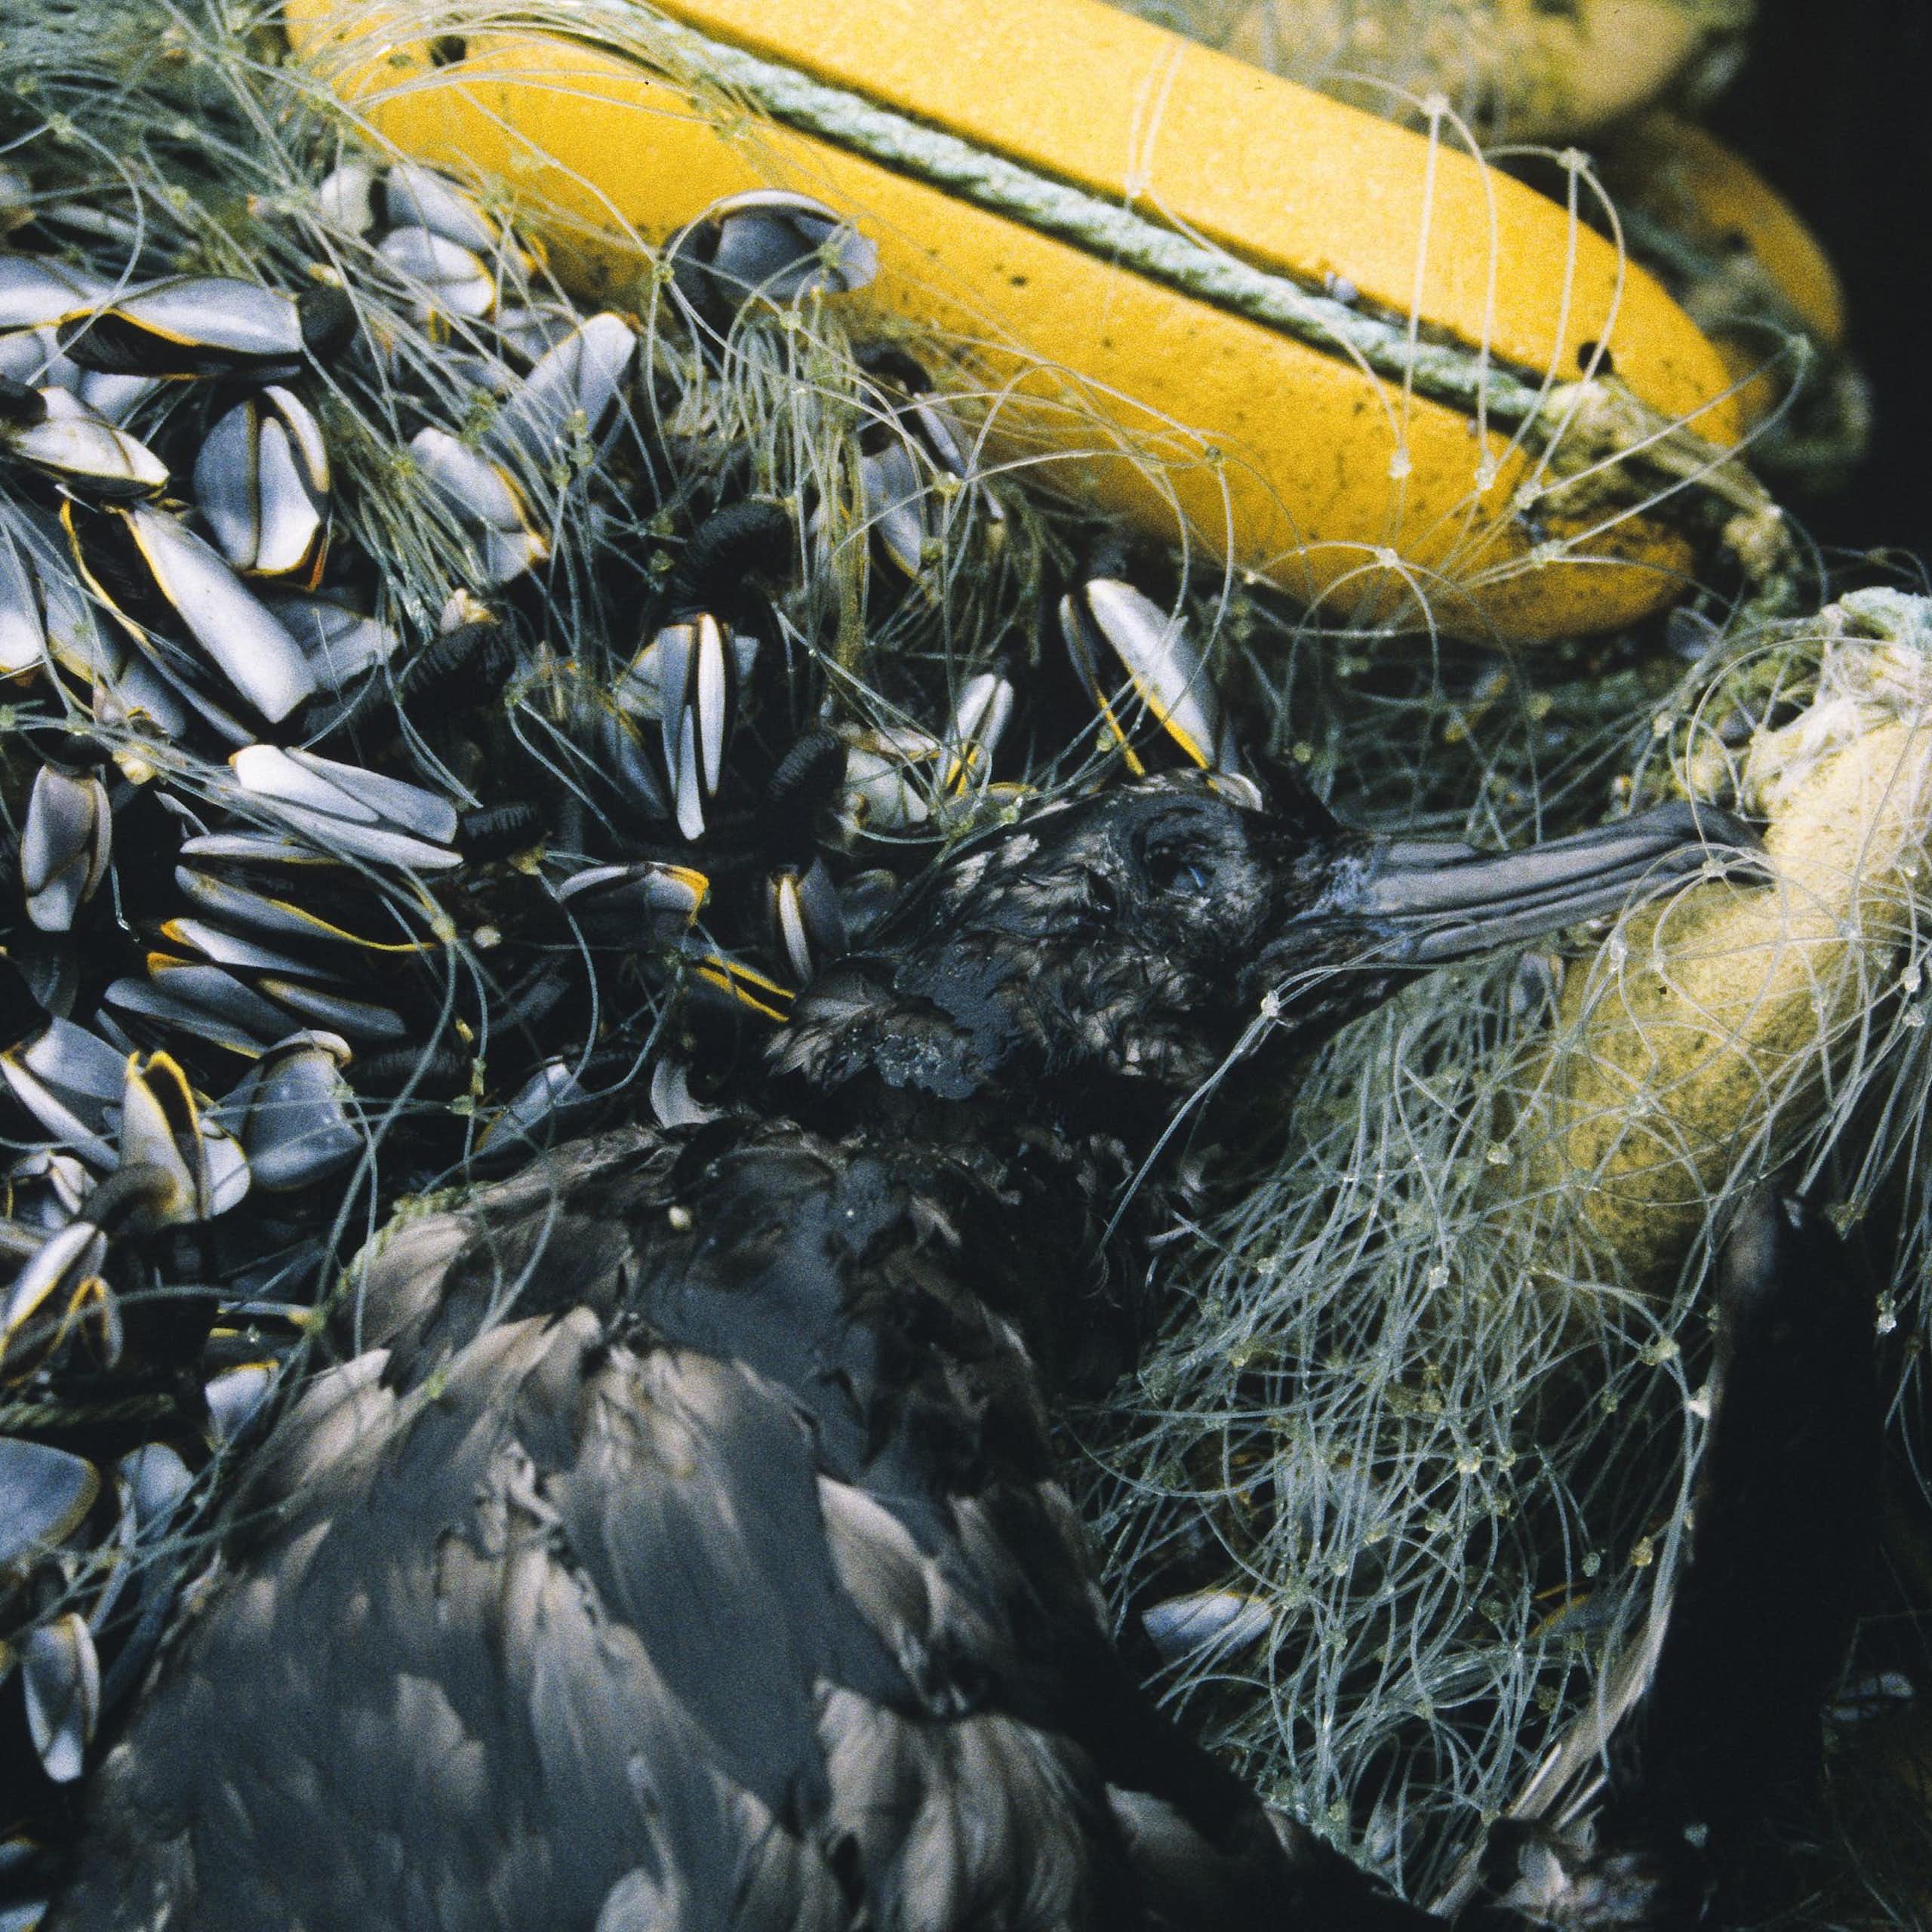 A large black bird, dead, tangled in a net with many fish